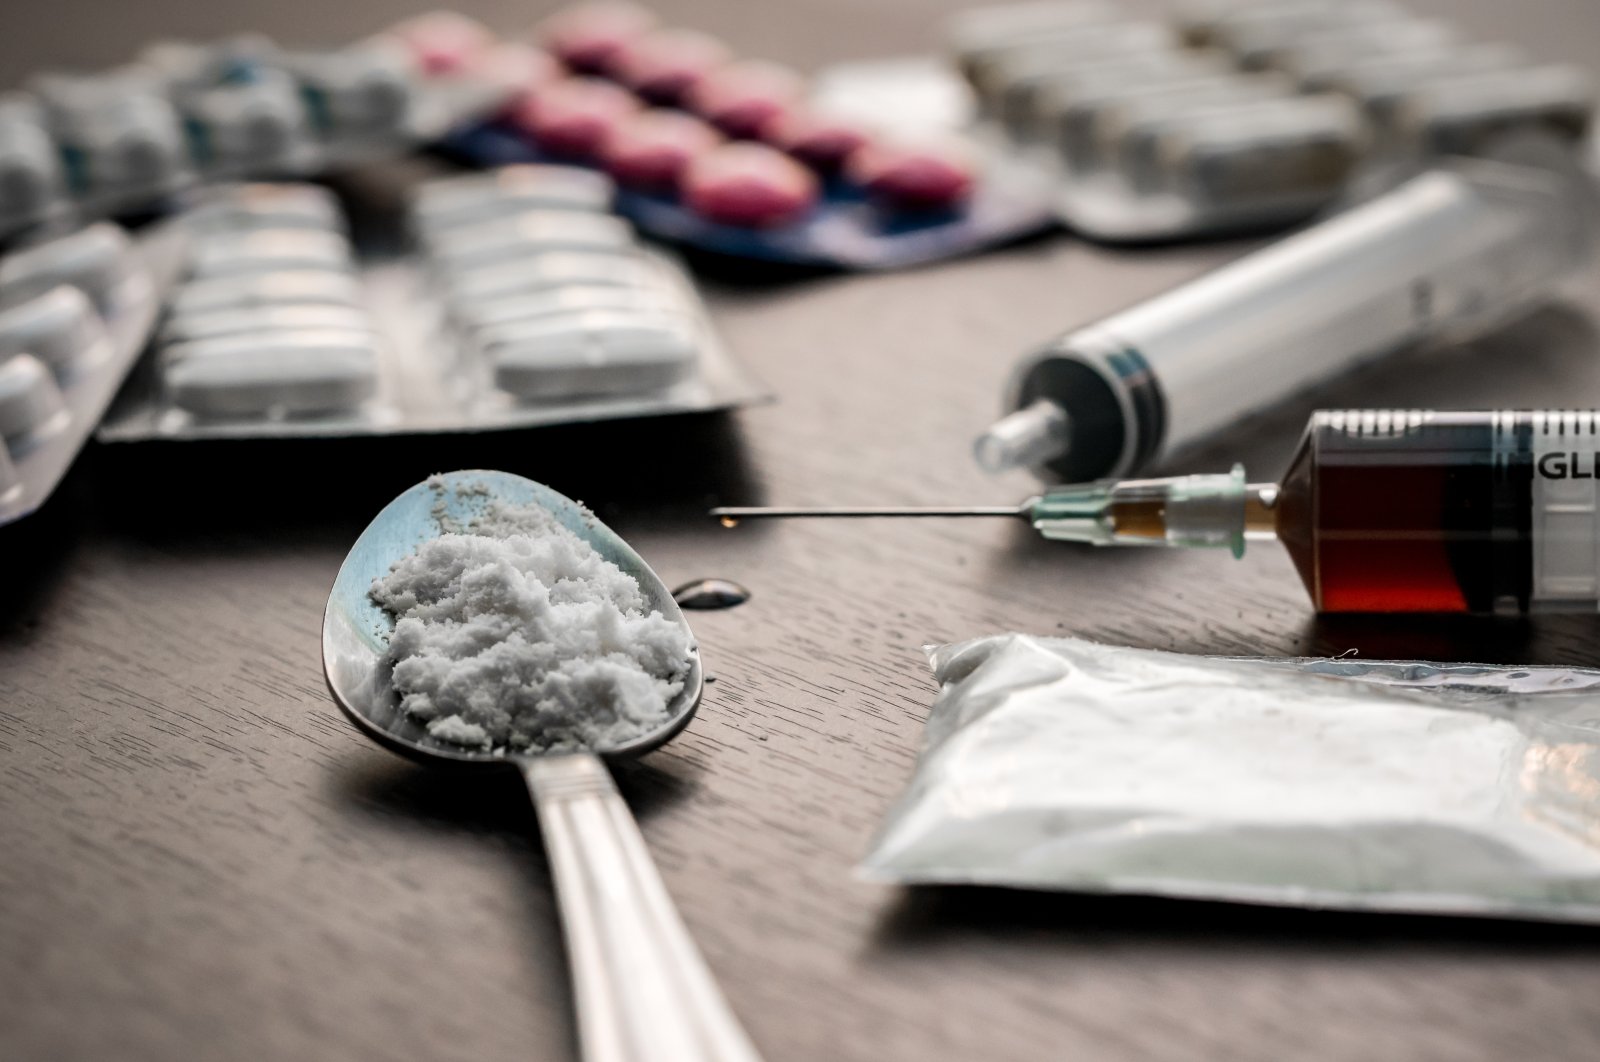 A female pharmacist was deliberately given drugs by her co-worker in Ankara for four years, which led to a traffic accident that killed her 4-year-old son. (Shutterstock Photo)